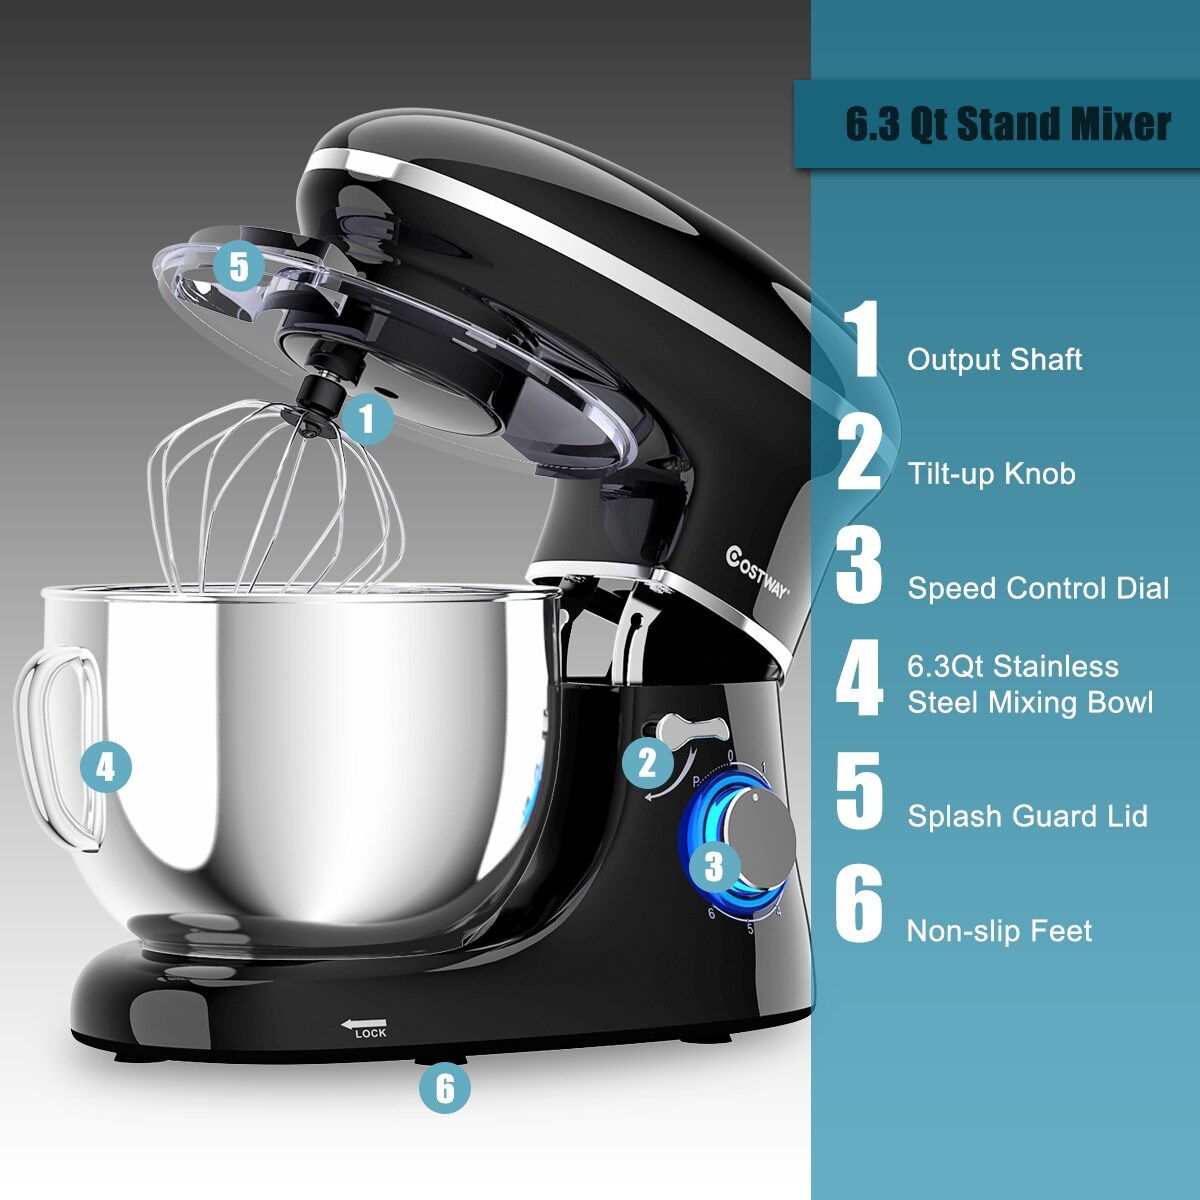 https://ak1.ostkcdn.com/images/products/is/images/direct/836c03ccb013e9a1cf42f07e62f77a571a975da3/6.3Qt-Electric-Tilt-Head-Food-Stand-Mixer-6-Speed-660W.jpg